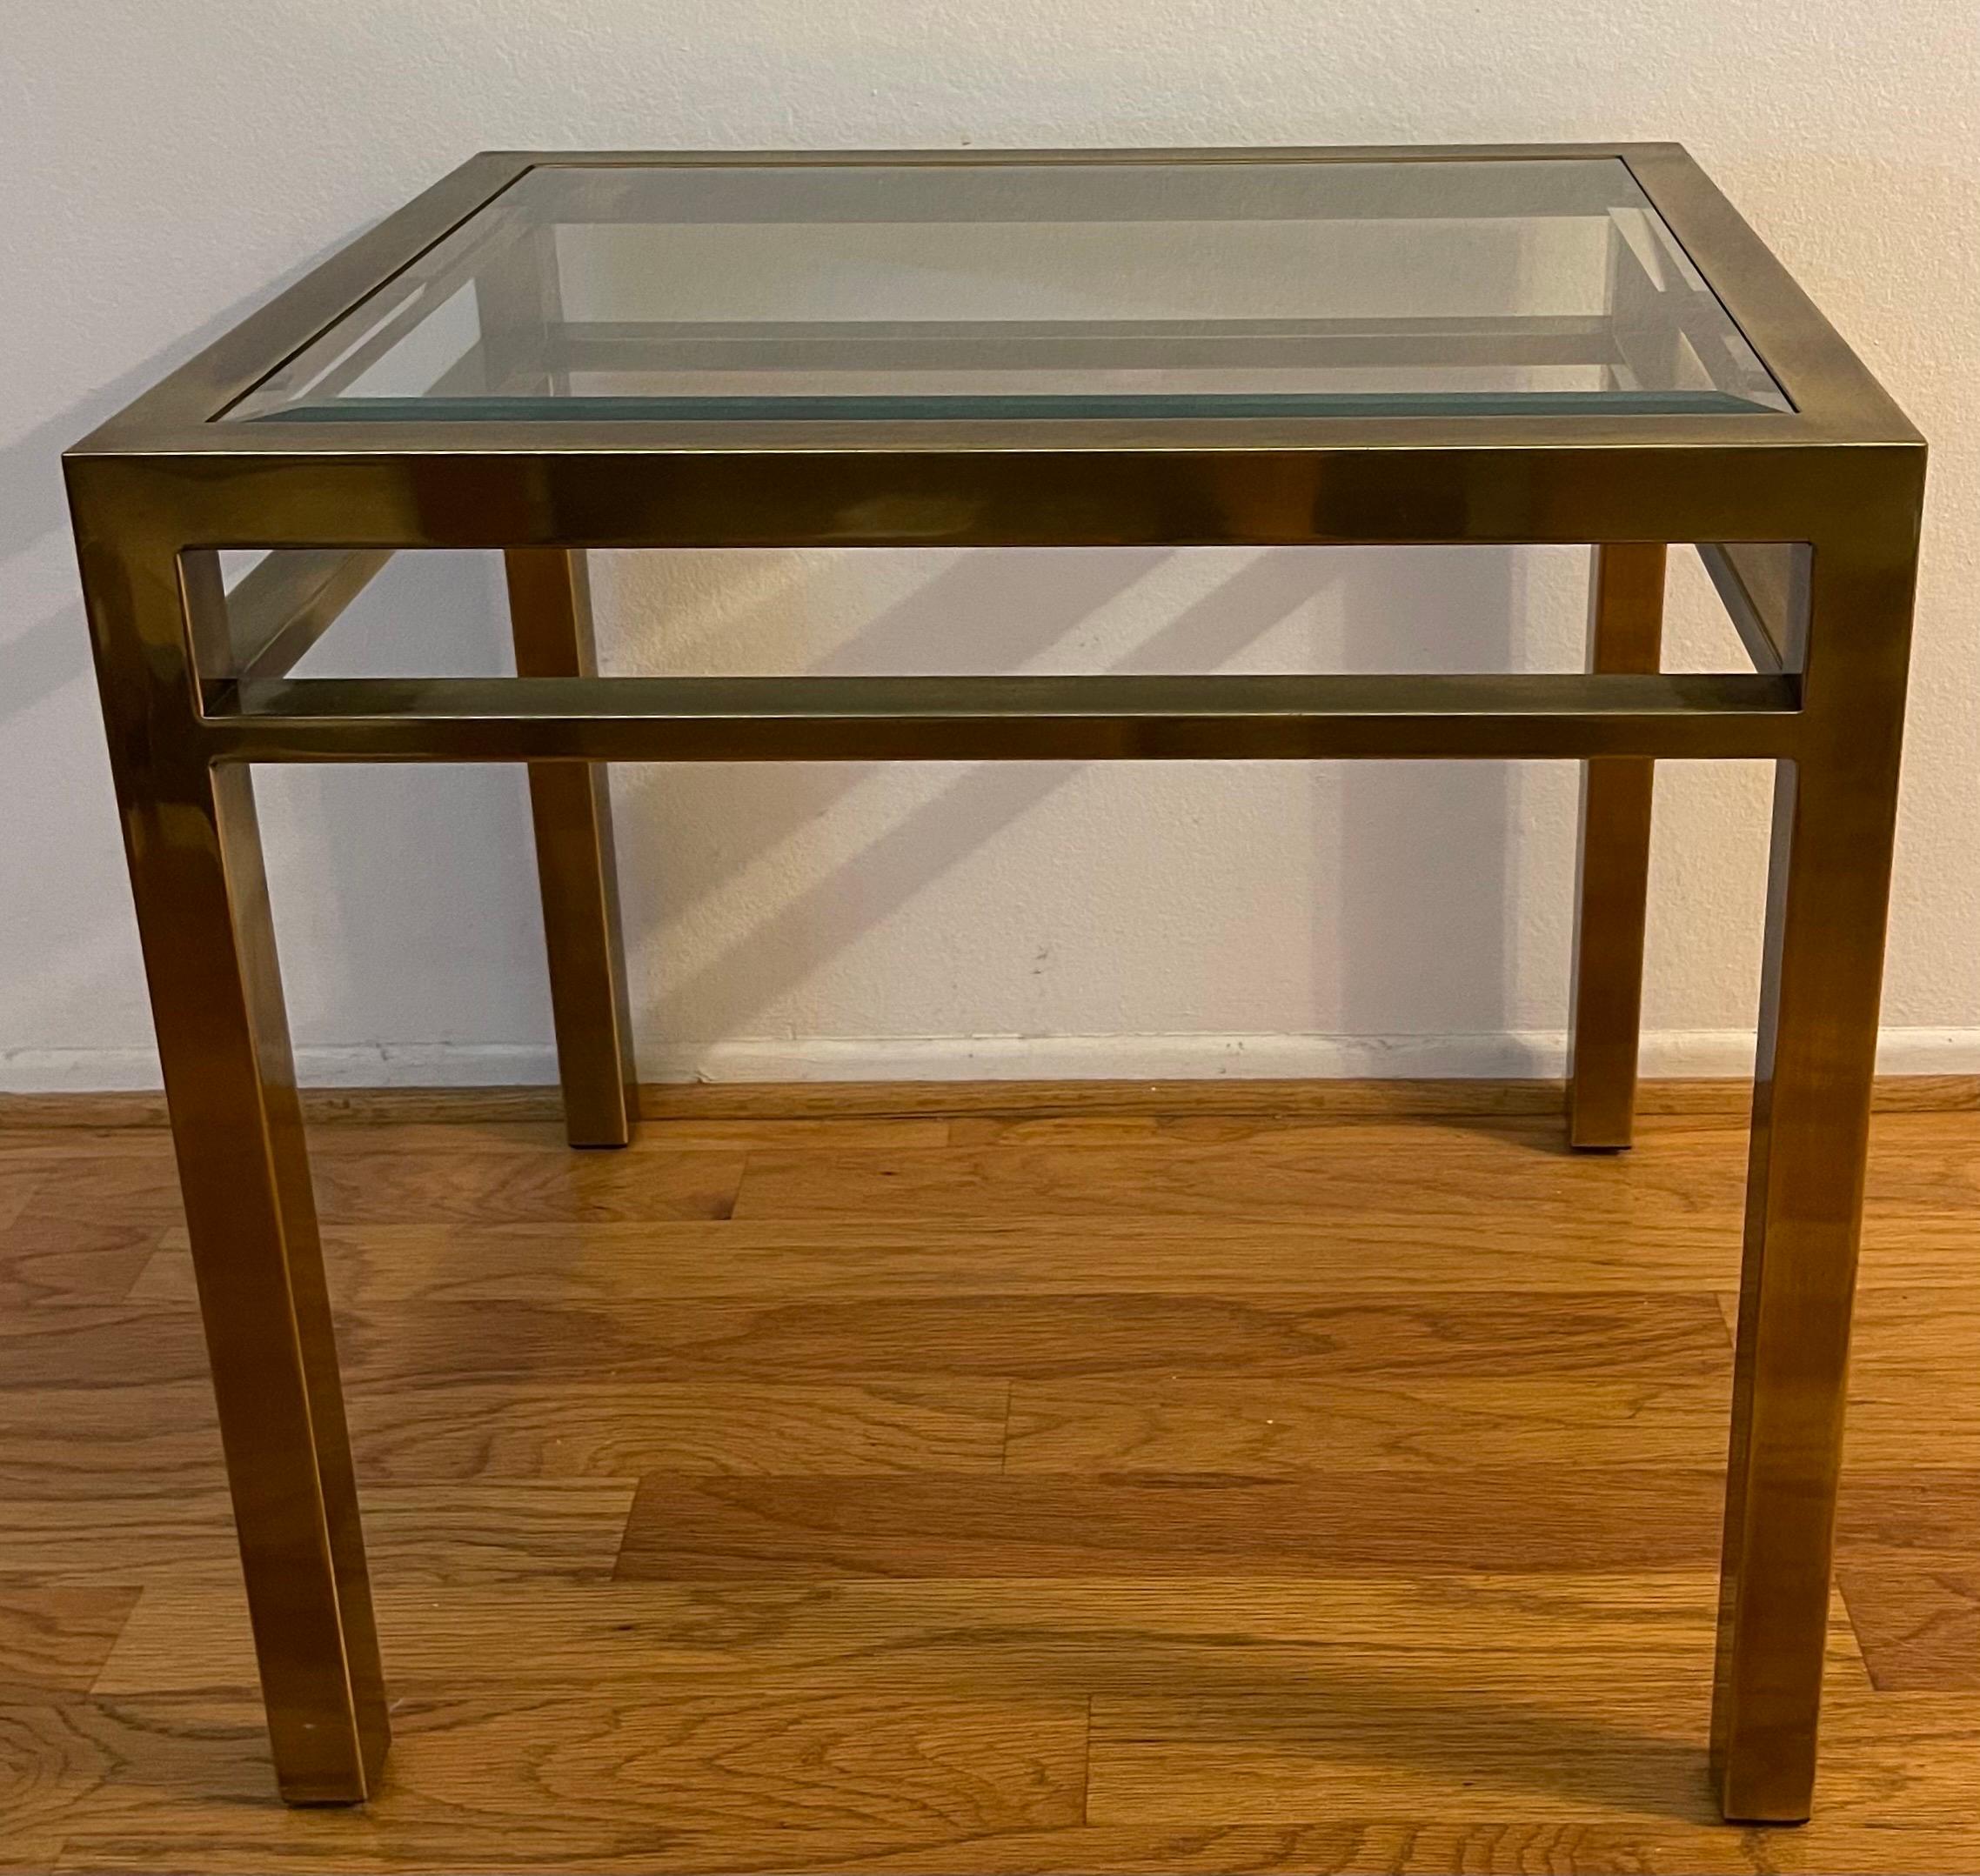 1970s burnished brass side table or end table in the style of Mastercraft. Original clear beveled glass top. 